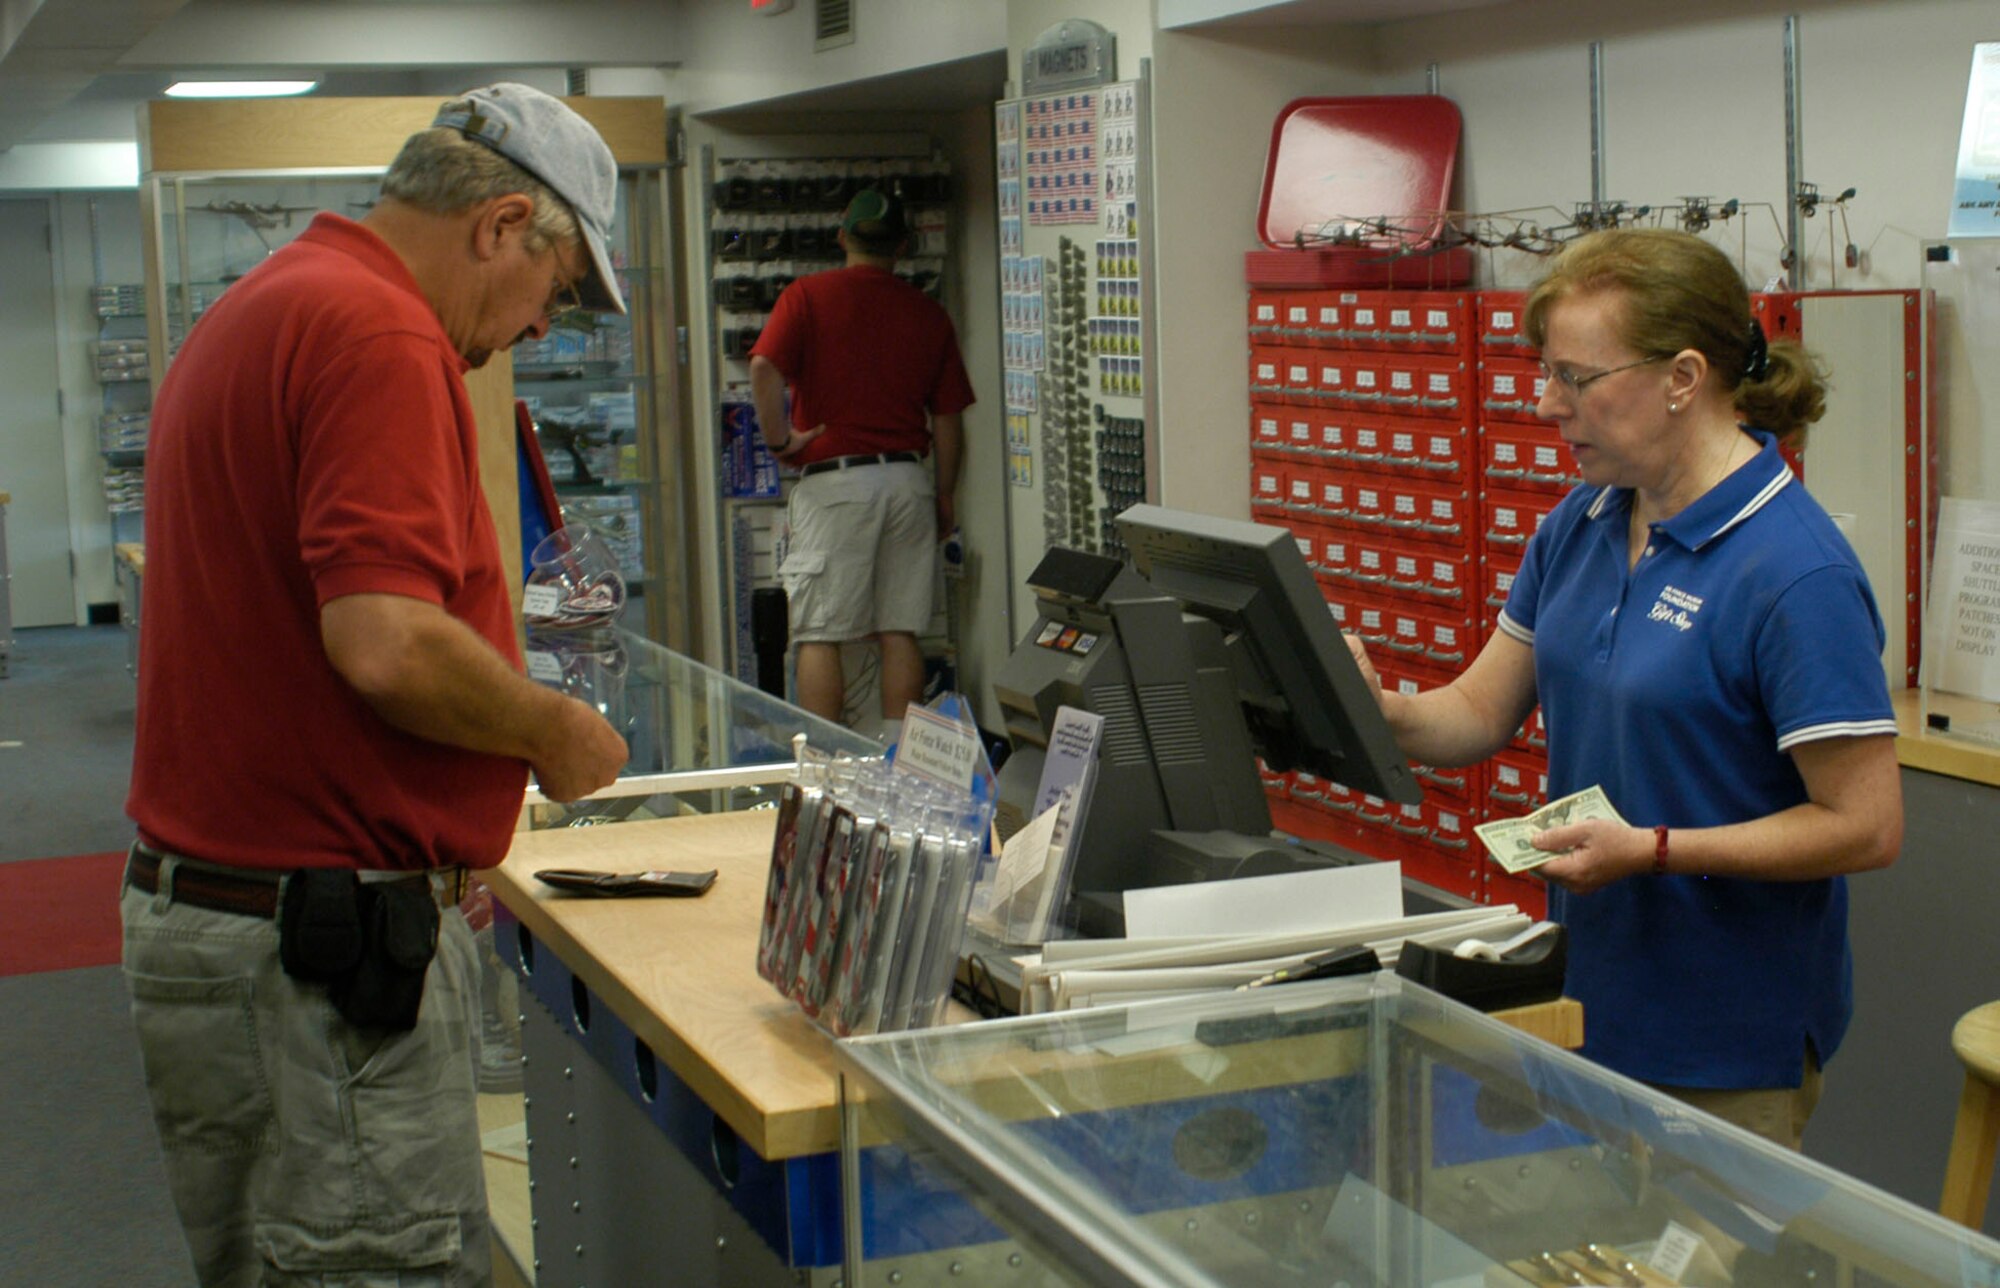 DAYTON, Ohio -- Air Force Museum Foundation employee Ann Uhlenhake (right) working in the gift shop at the National Museum of the U.S. Air Force. Uhlenhake, who is also a retired Air Force nurse, helped administer CPR to save the life of a recent museum visitor.  (U.S. Air Force Photo)  